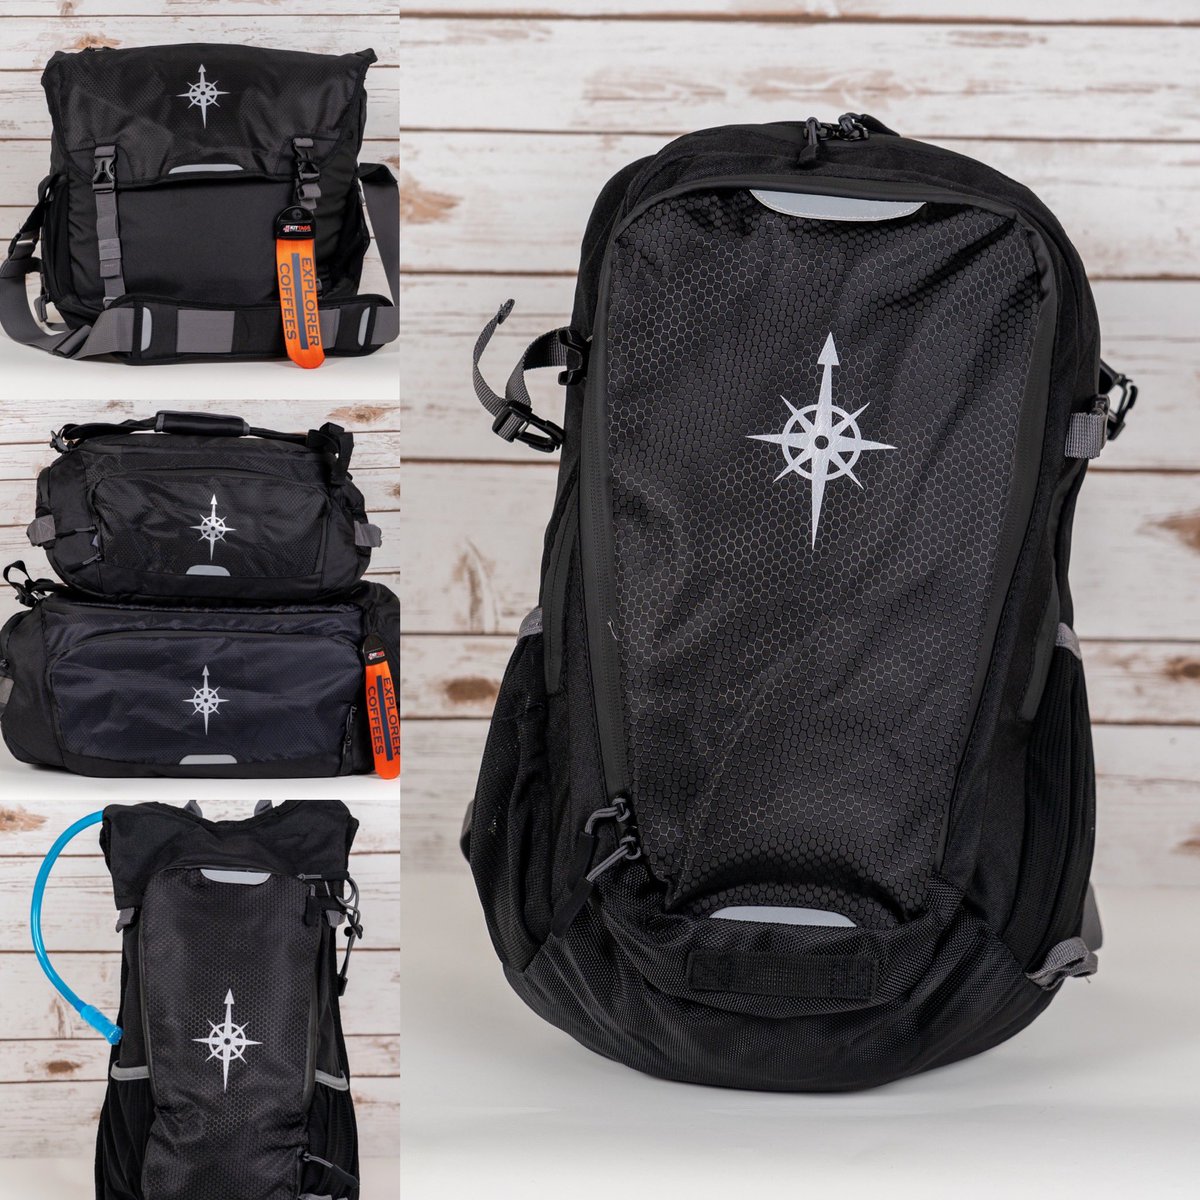 Off on your travels? Don’t forget, we have your luggage needs met:

Holdalls
Daysacks
Waist packs 
Messenger Bags
Hydration Packs

#FollowTheCompass #BeAnExplorer 

explorercoffees.com/product-catego…